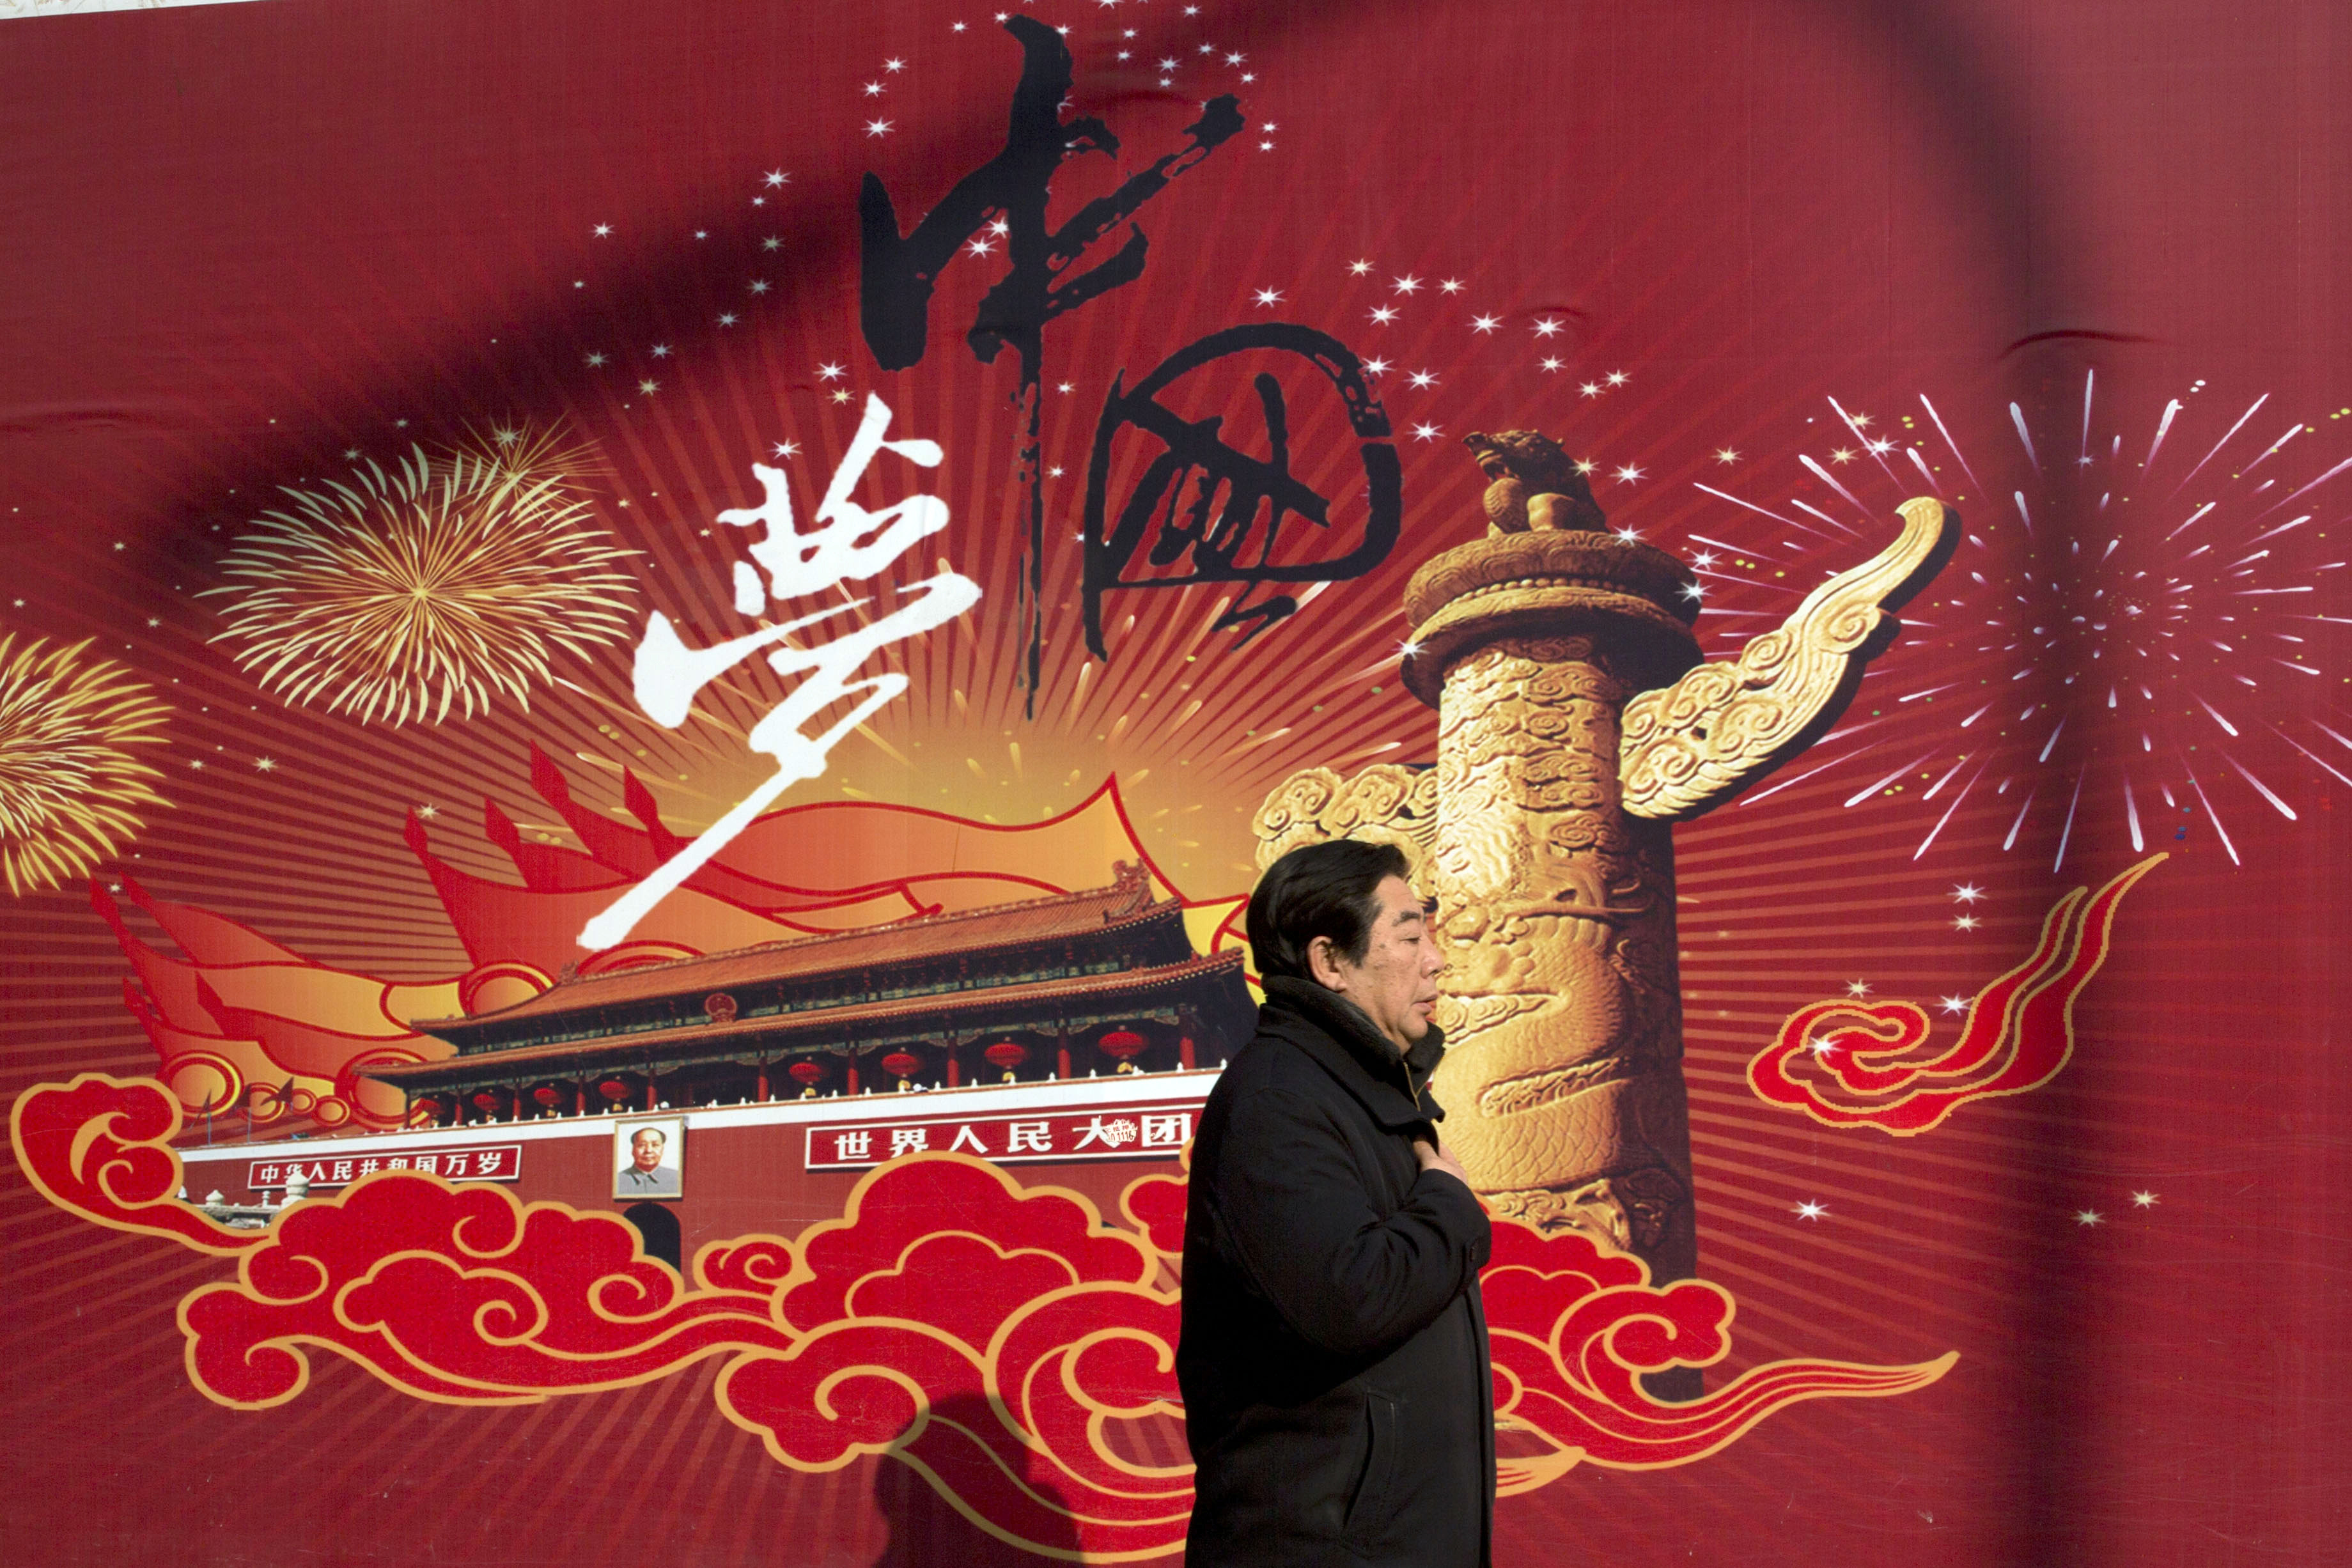  Xi Jinping's Chinese dream aims in part to "reclaim national pride" and improve personal well-being. Photo: AP